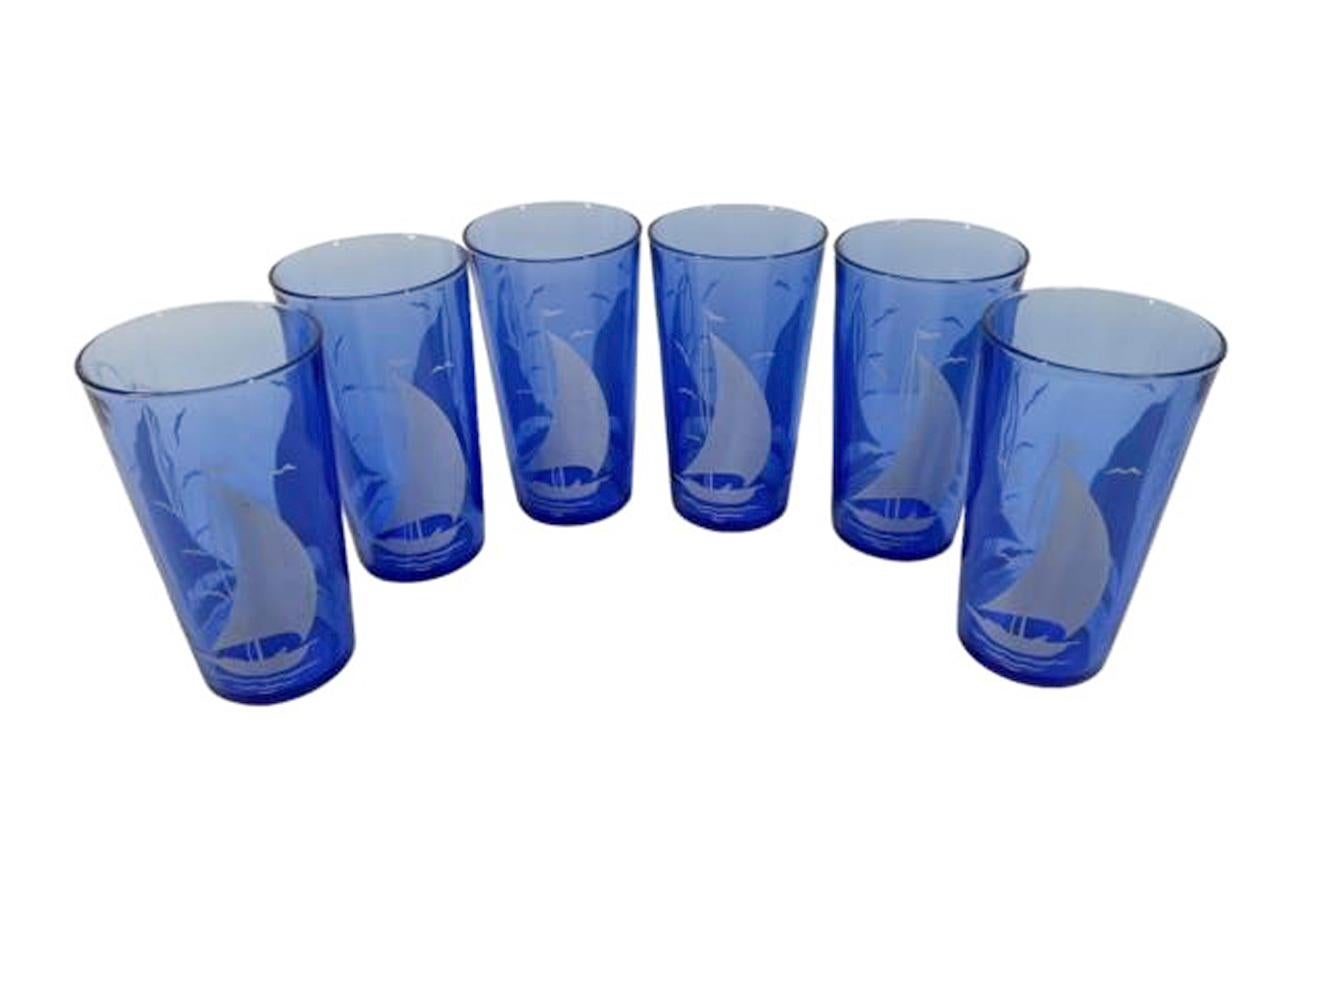 Seven-piece cocktail shaker set from the Sportsmans Series by Hazel-Atlas. Chrome lidded cobalt blue cocktail shaker and six matching glasses with white sail boats and birds.